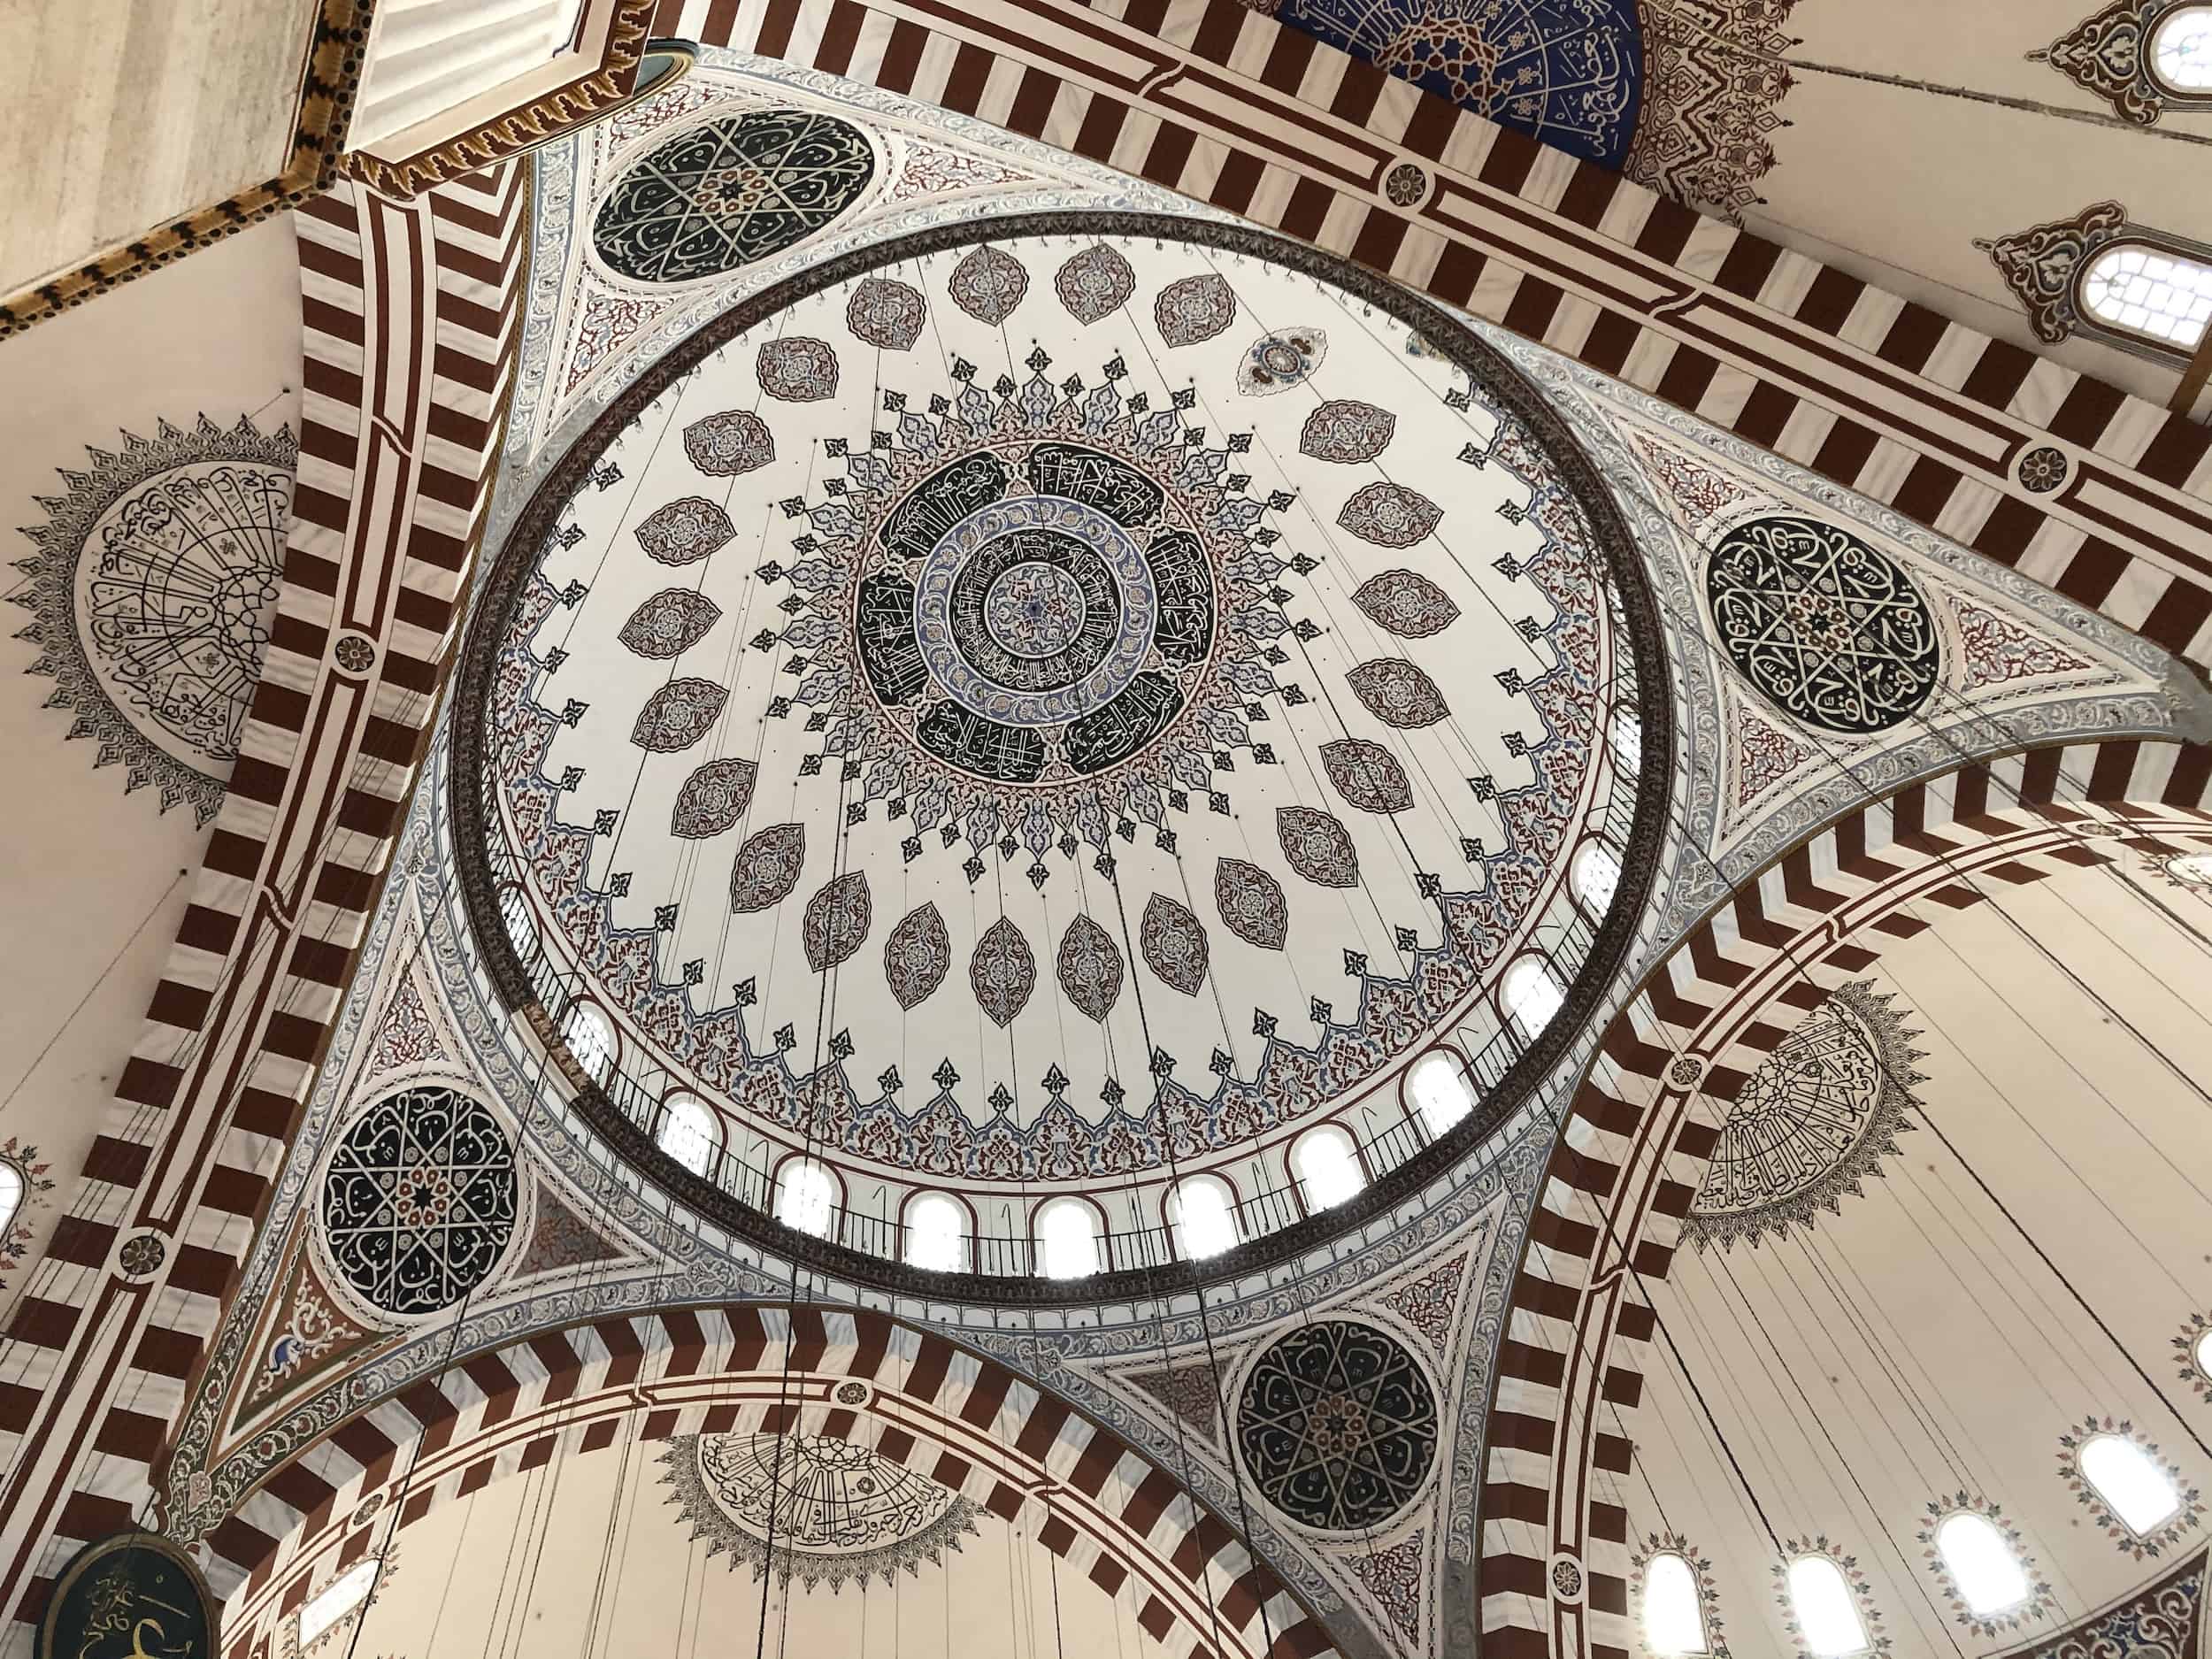 Dome at the Şehzade Mosque in Istanbul, Turkey